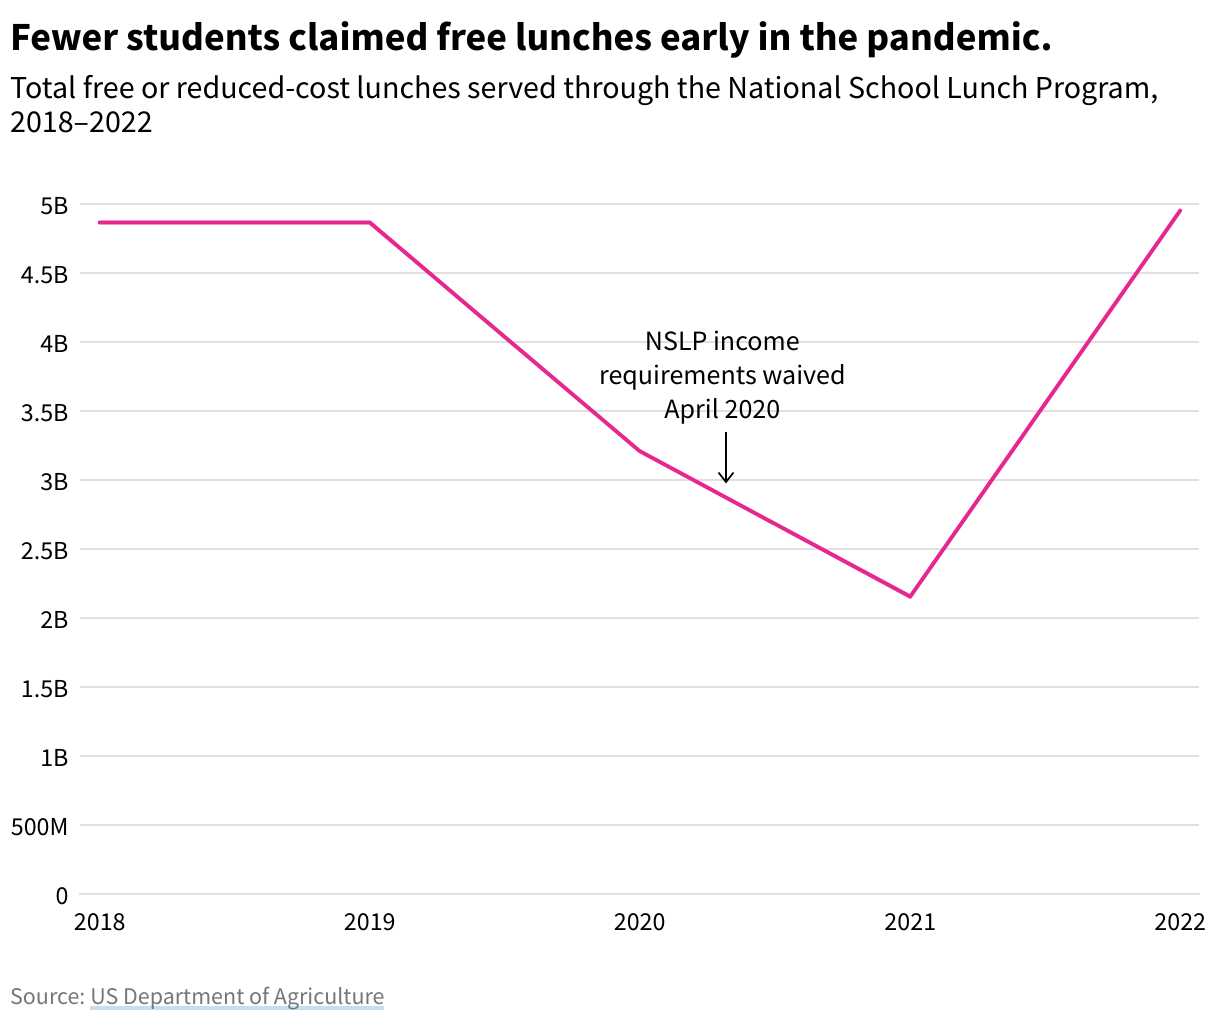 Line chart showing drop in lunches served from 2019 through 2021, and a complete rebound in 2022.